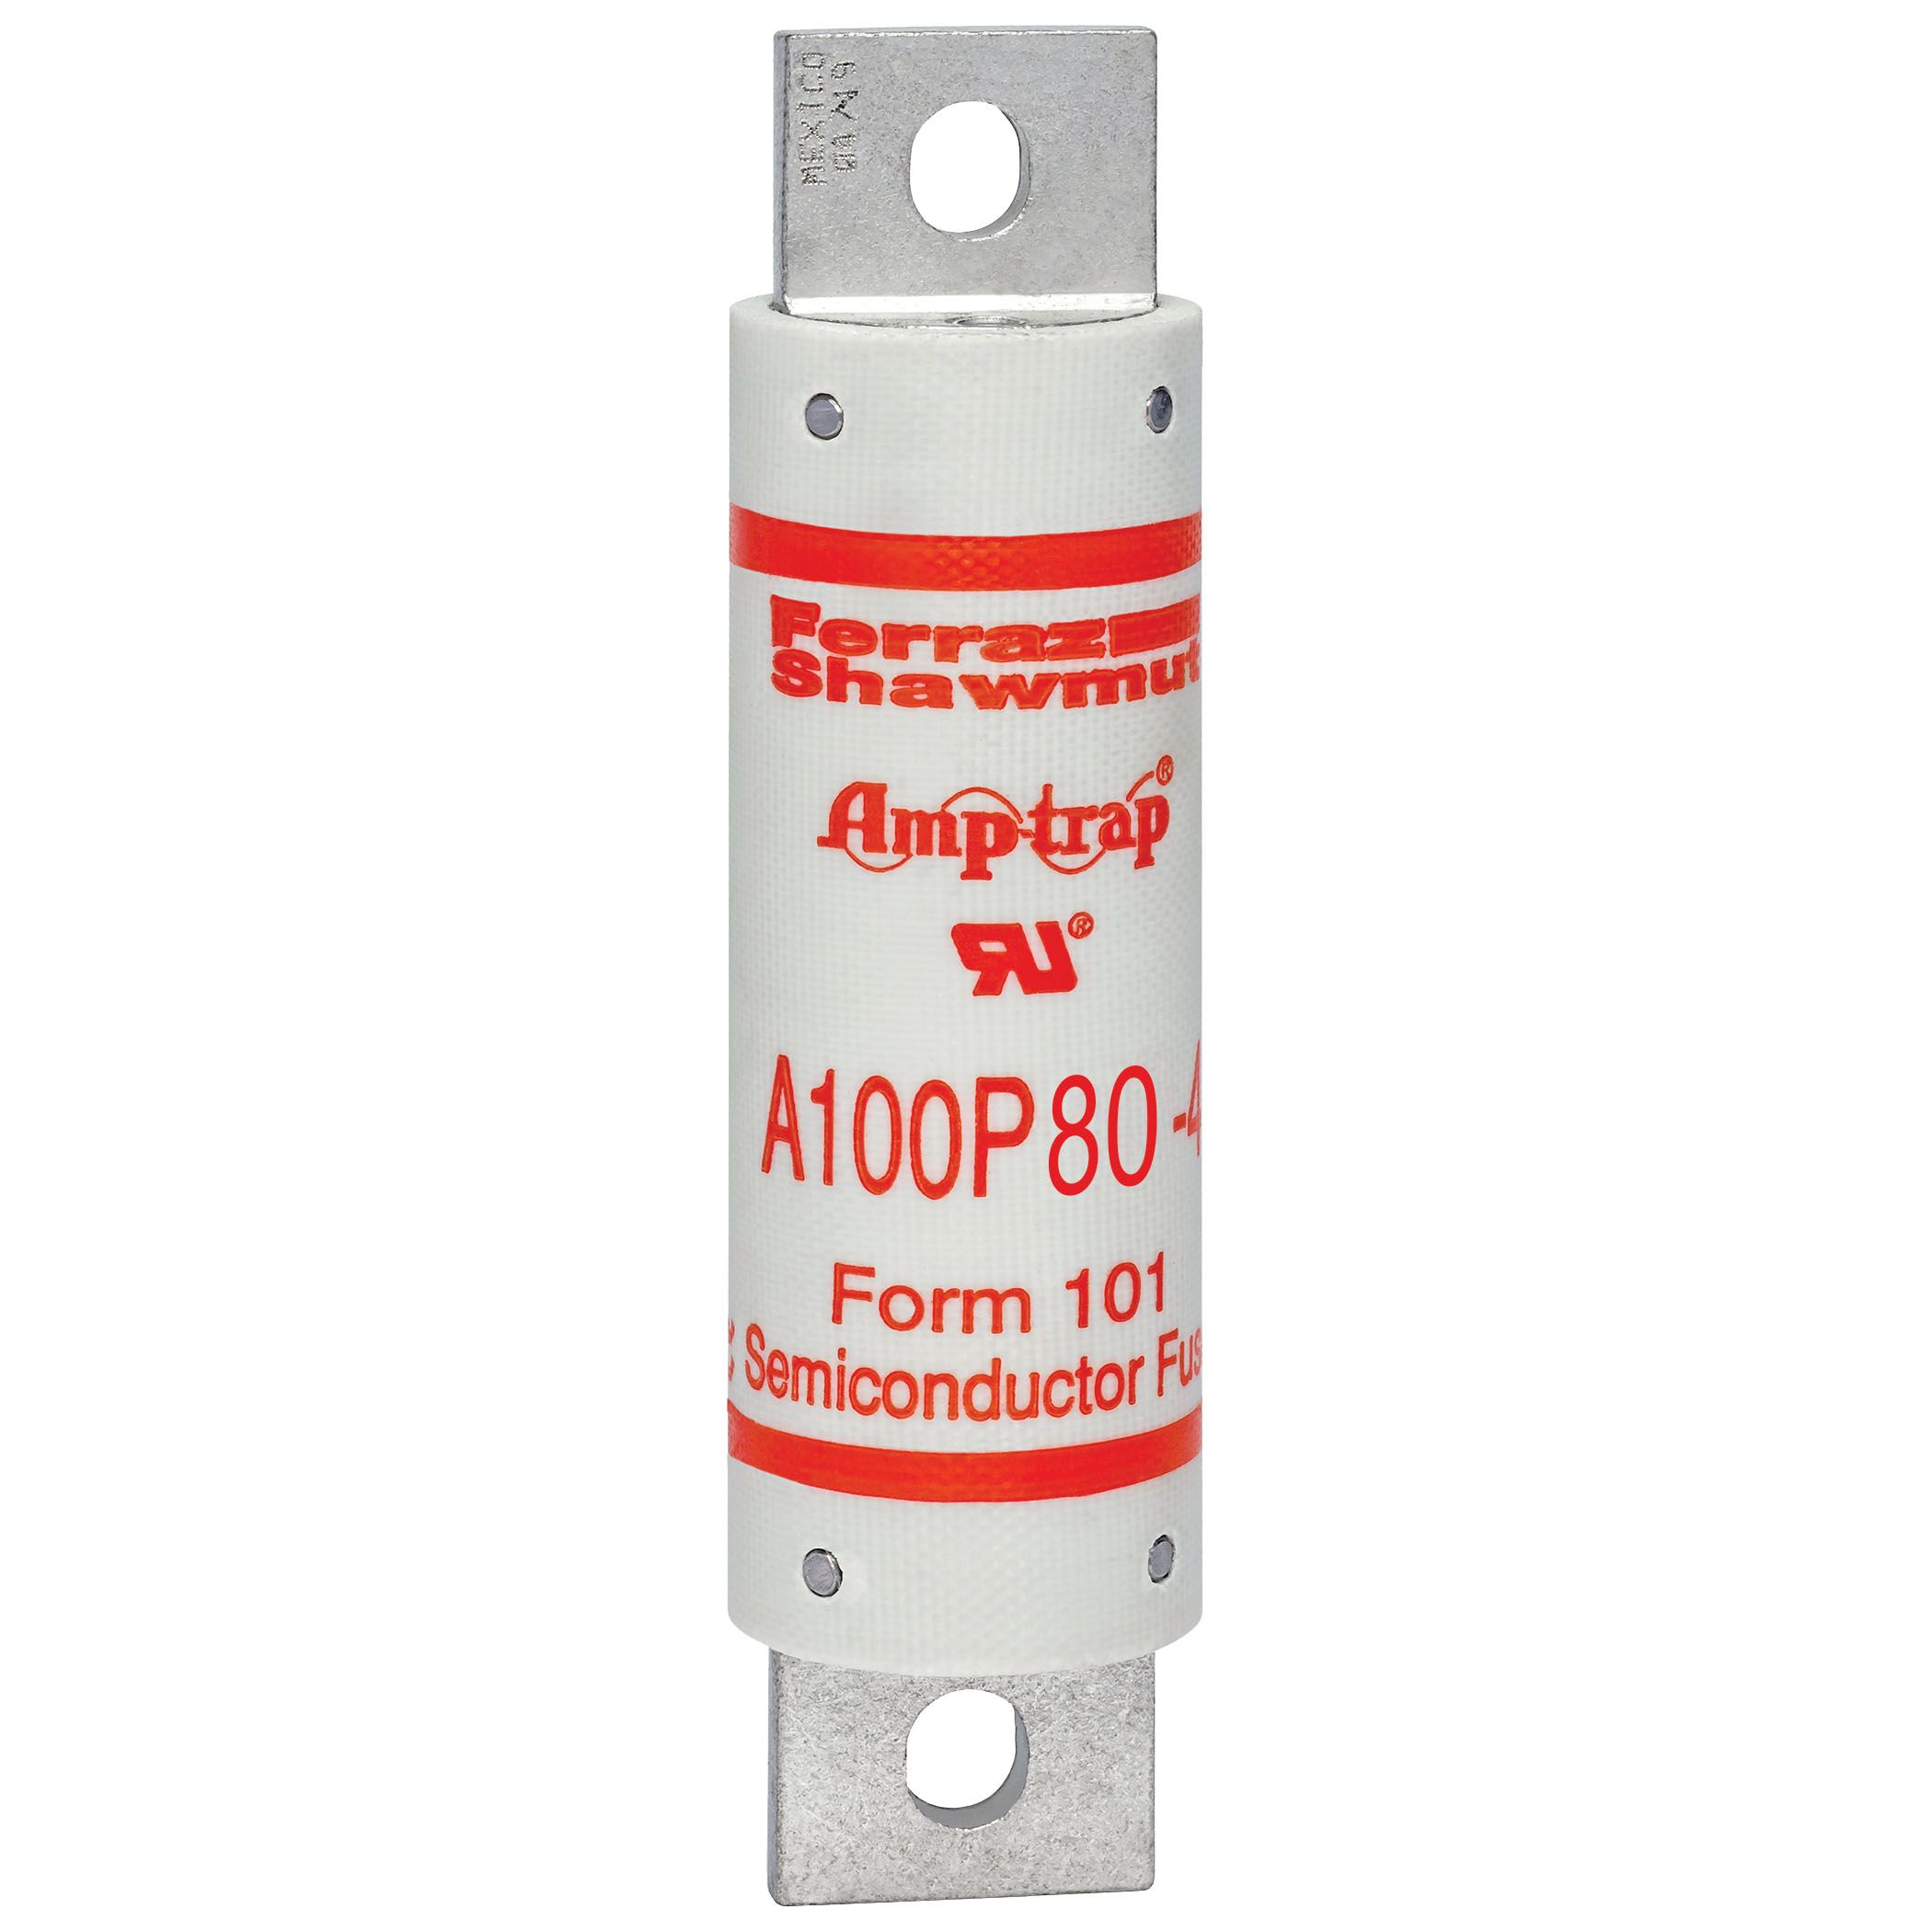 A100P80-4 - Semiconductor Fuse Amp-Trap® 1000V 80A aR High Speed A100P